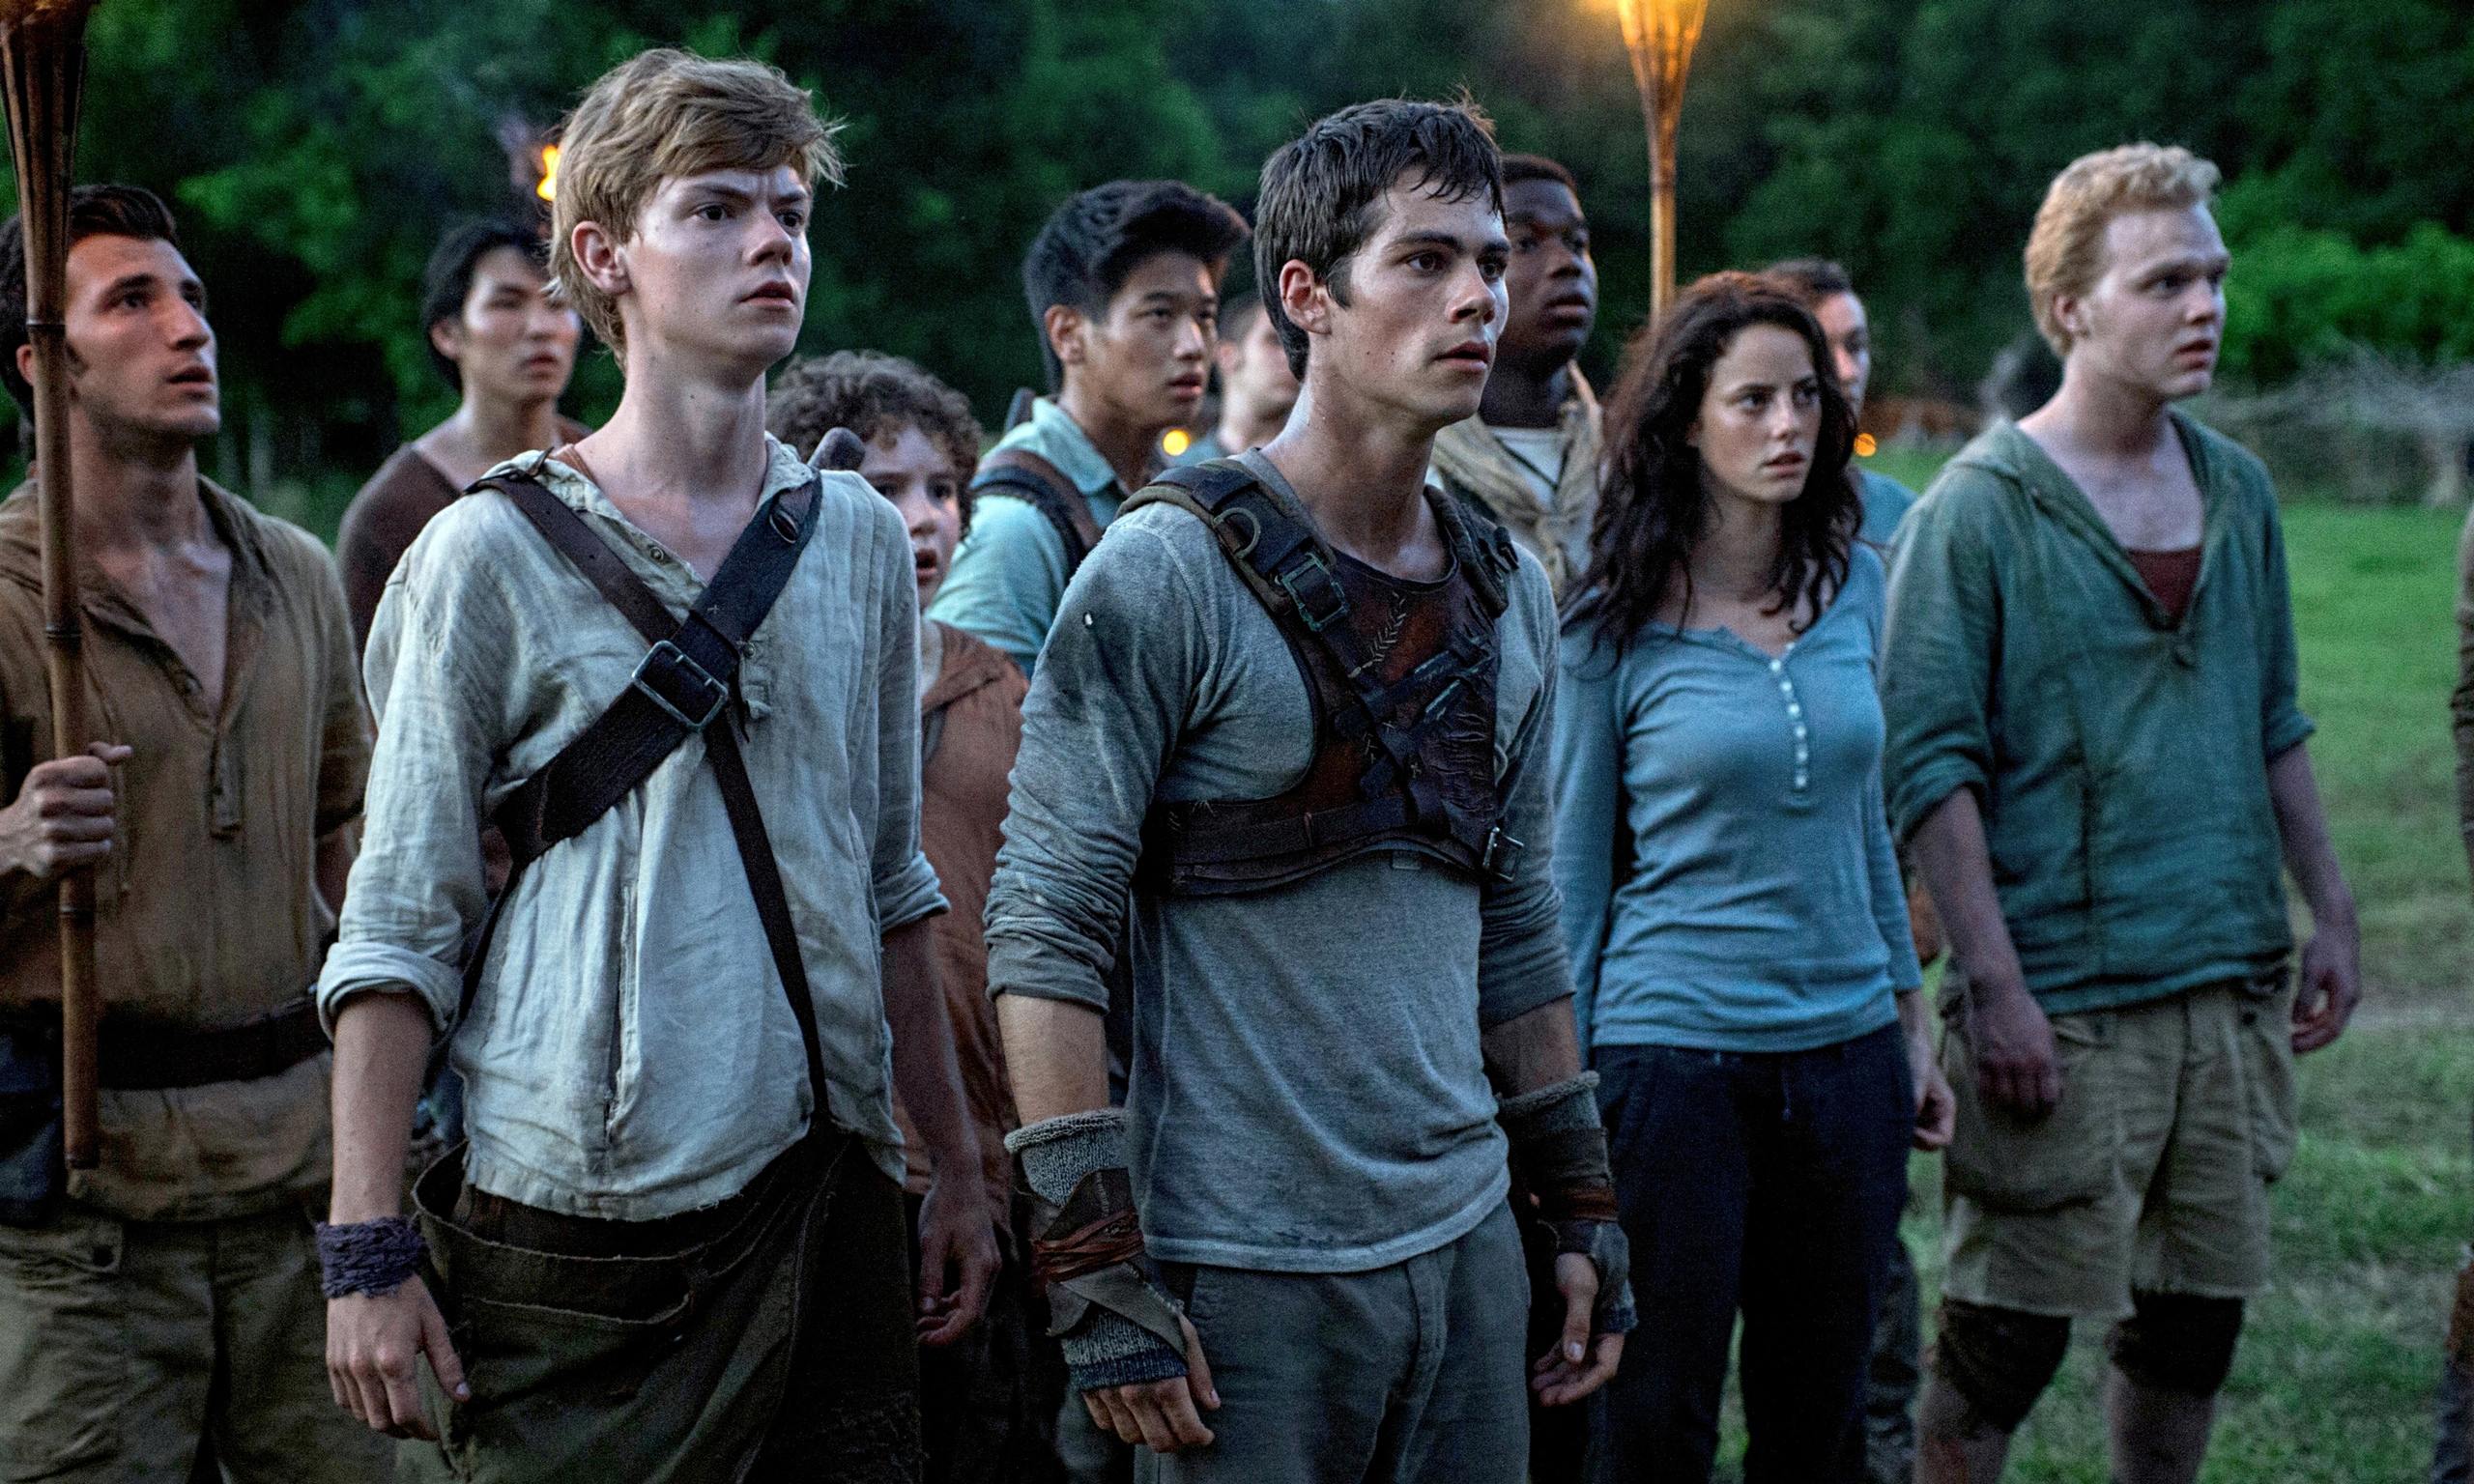 How to Watch The Maze Runner